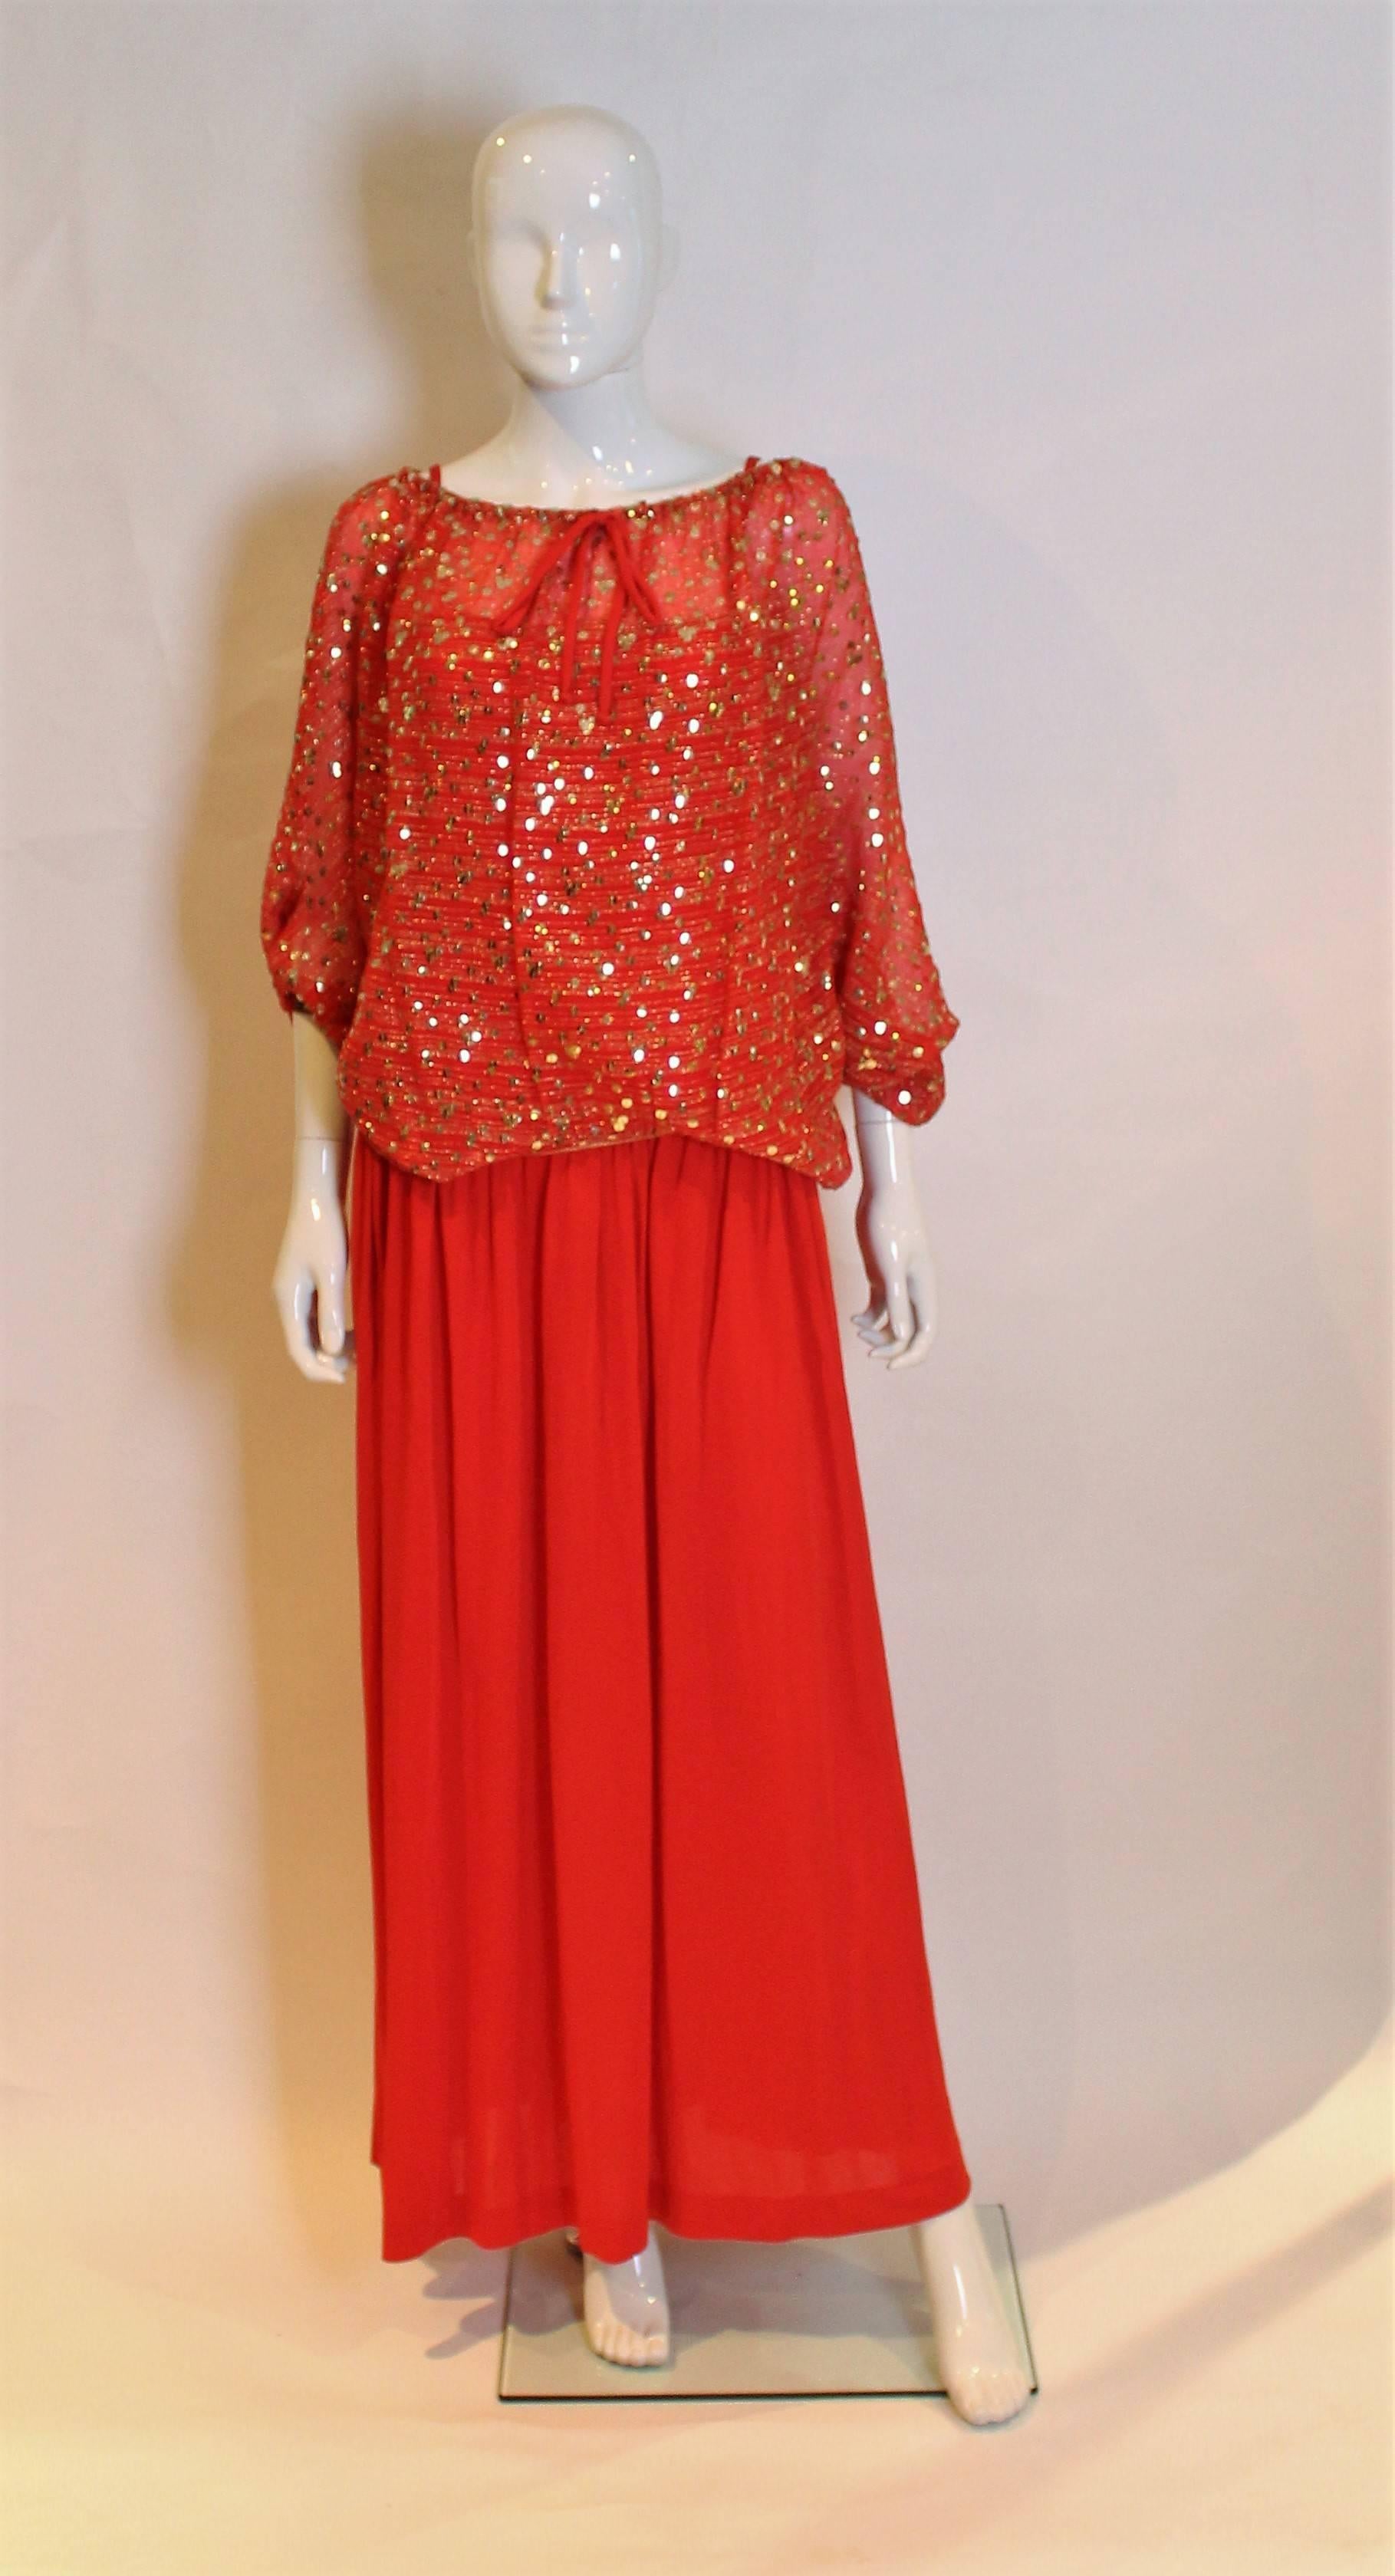 
A lovely evening dress and top by Christian Dior. The red dress has spaghetti straps and a drop waist , with a side zip. The over top is red with gold sequin and thread detail. It has a drawstring waist, elbow length sleaves, and a button opening